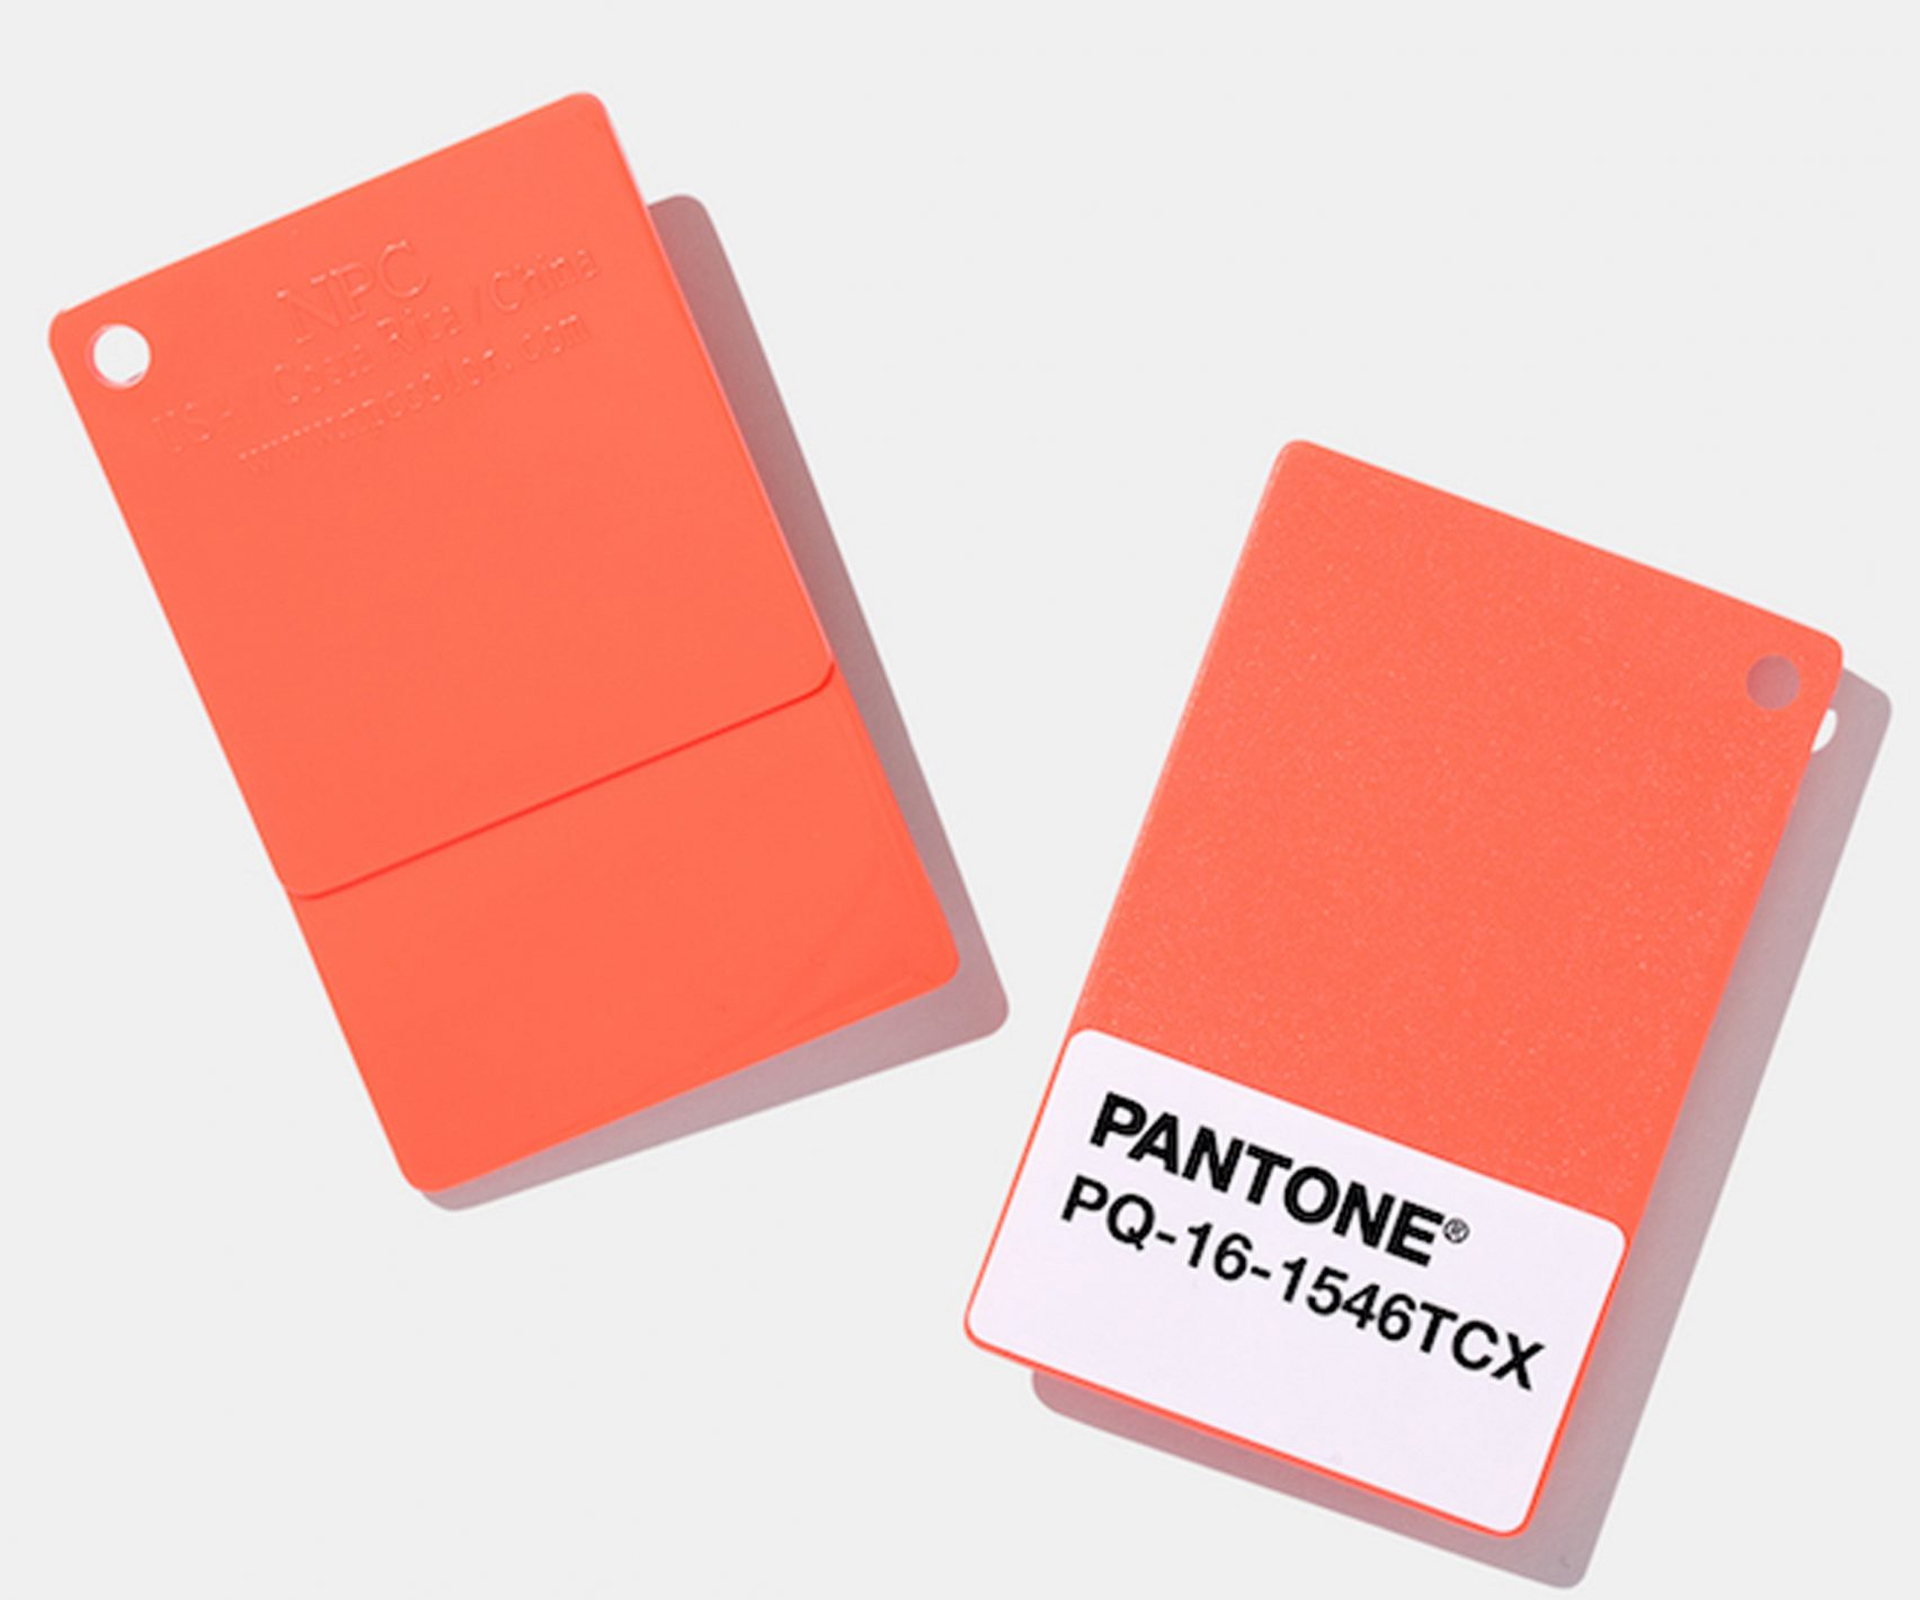 Pantone's 2019 Colour of the Year Living Coral